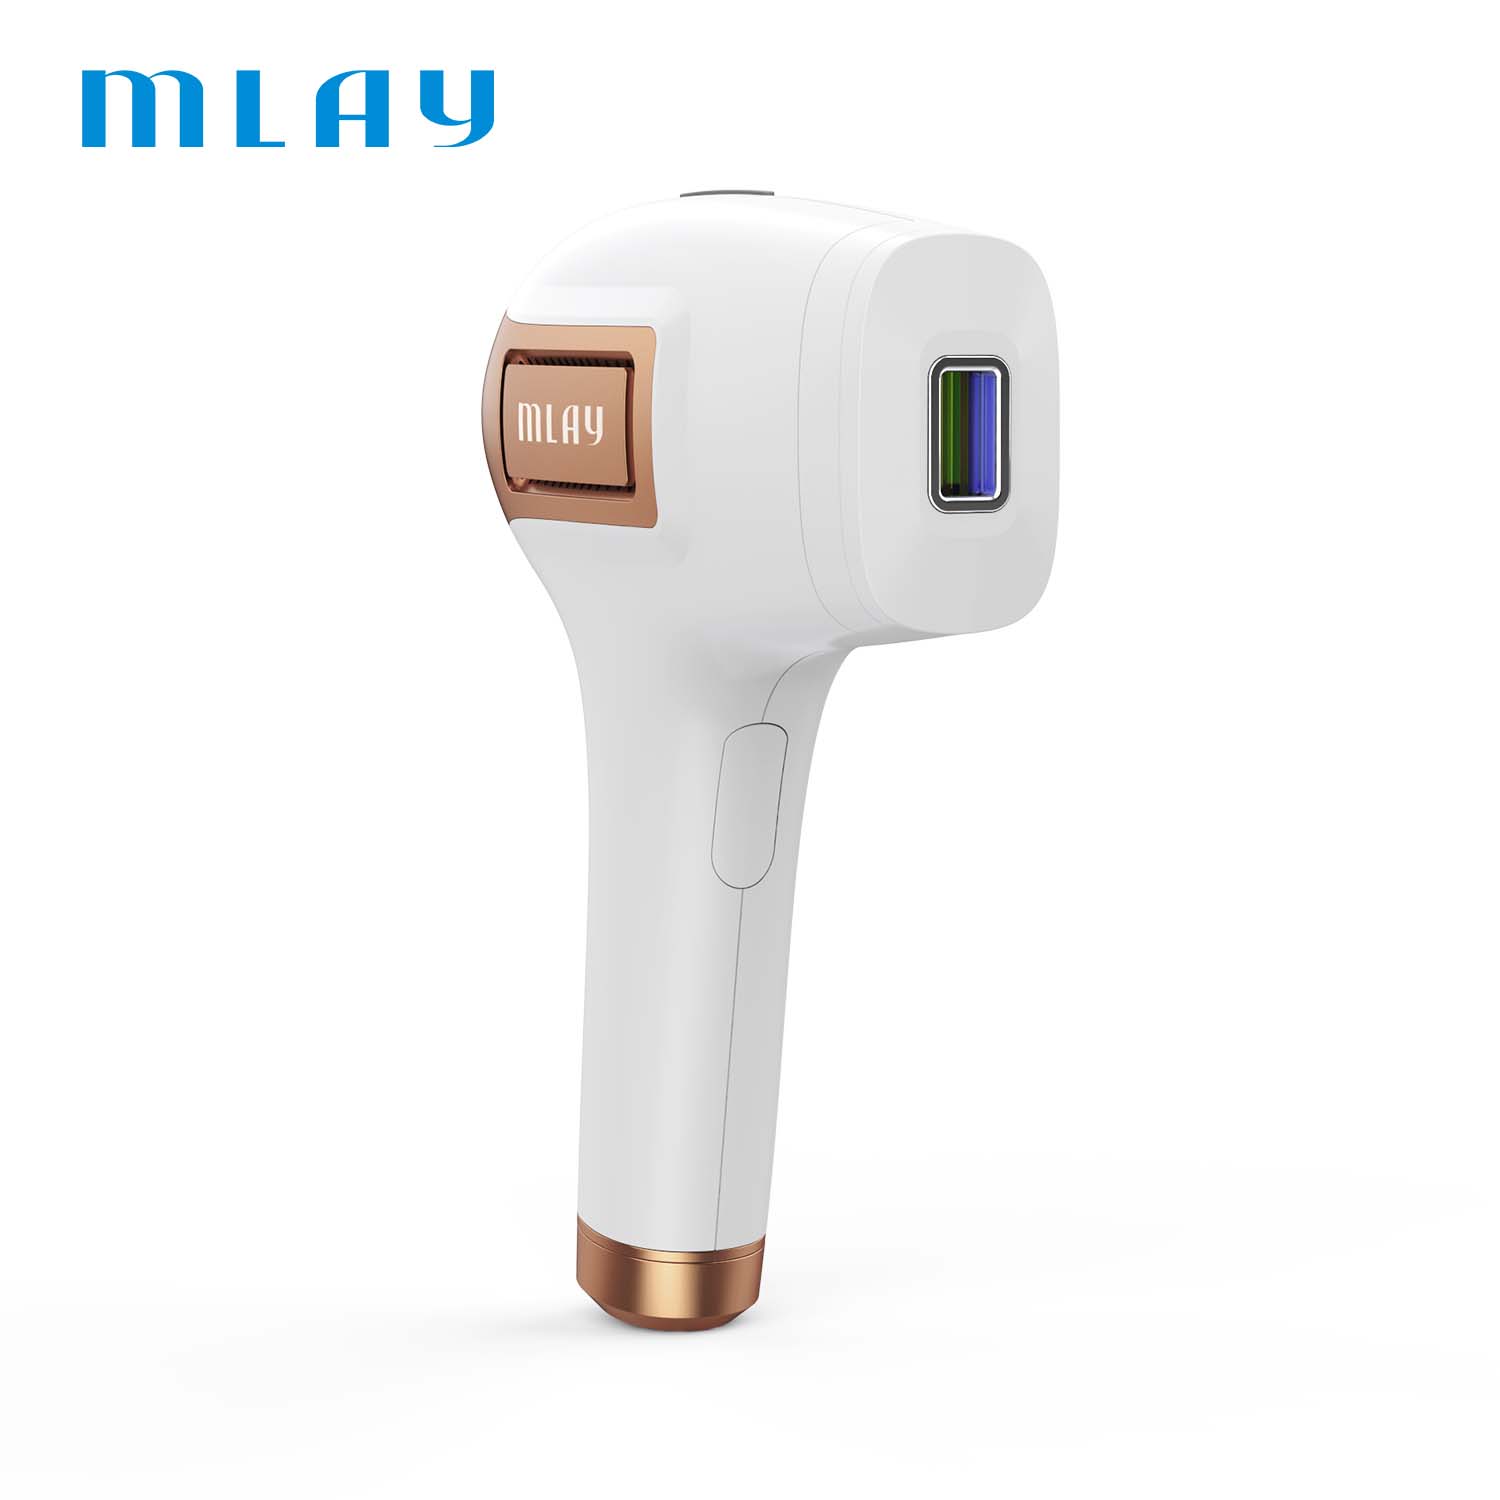 Upgraded Ice Cool Ice Compress Laser Ipl Hair Removal Machine Painless Permanent Portable Depilator